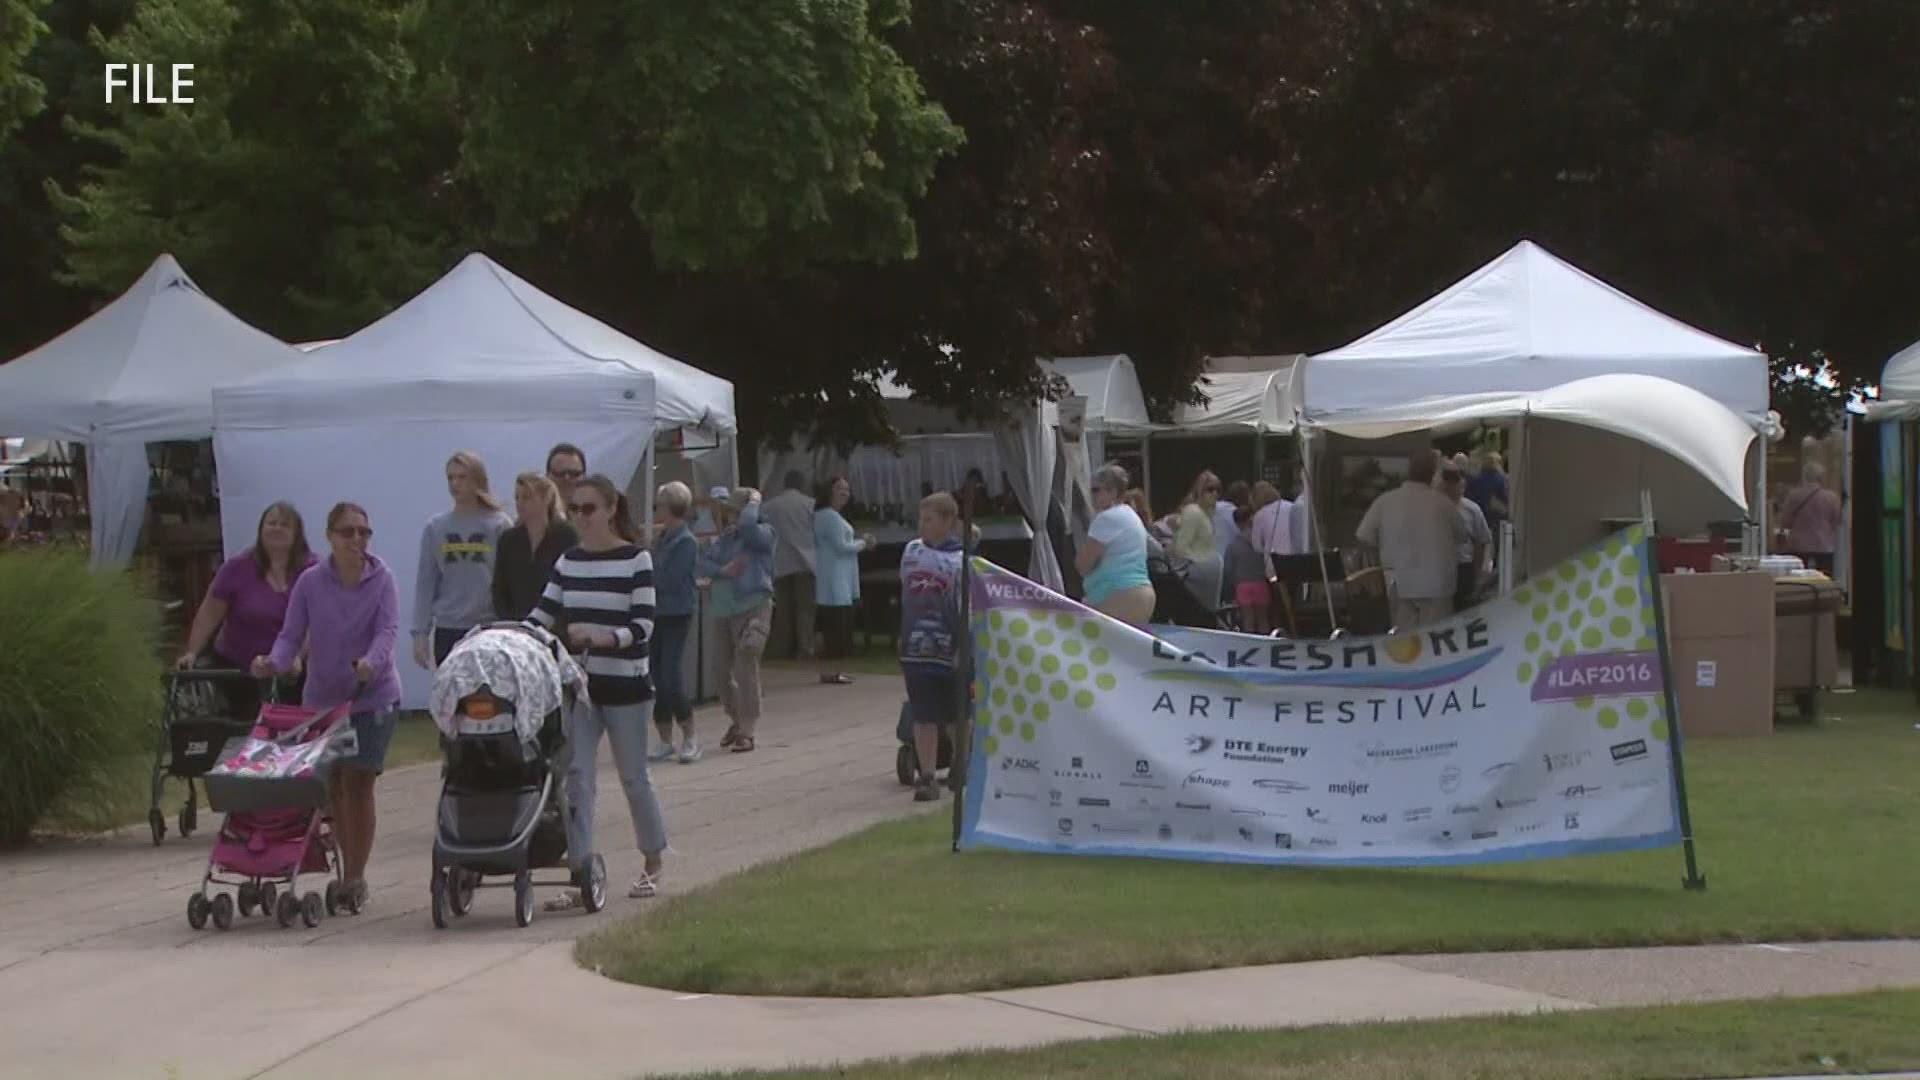 After a year off, the Lakeshore Art Festival returns to downtown Muskegon on June 26 from 9 a.m. to 5 p.m. and June 27 from 10 a.m. to 3 p.m.